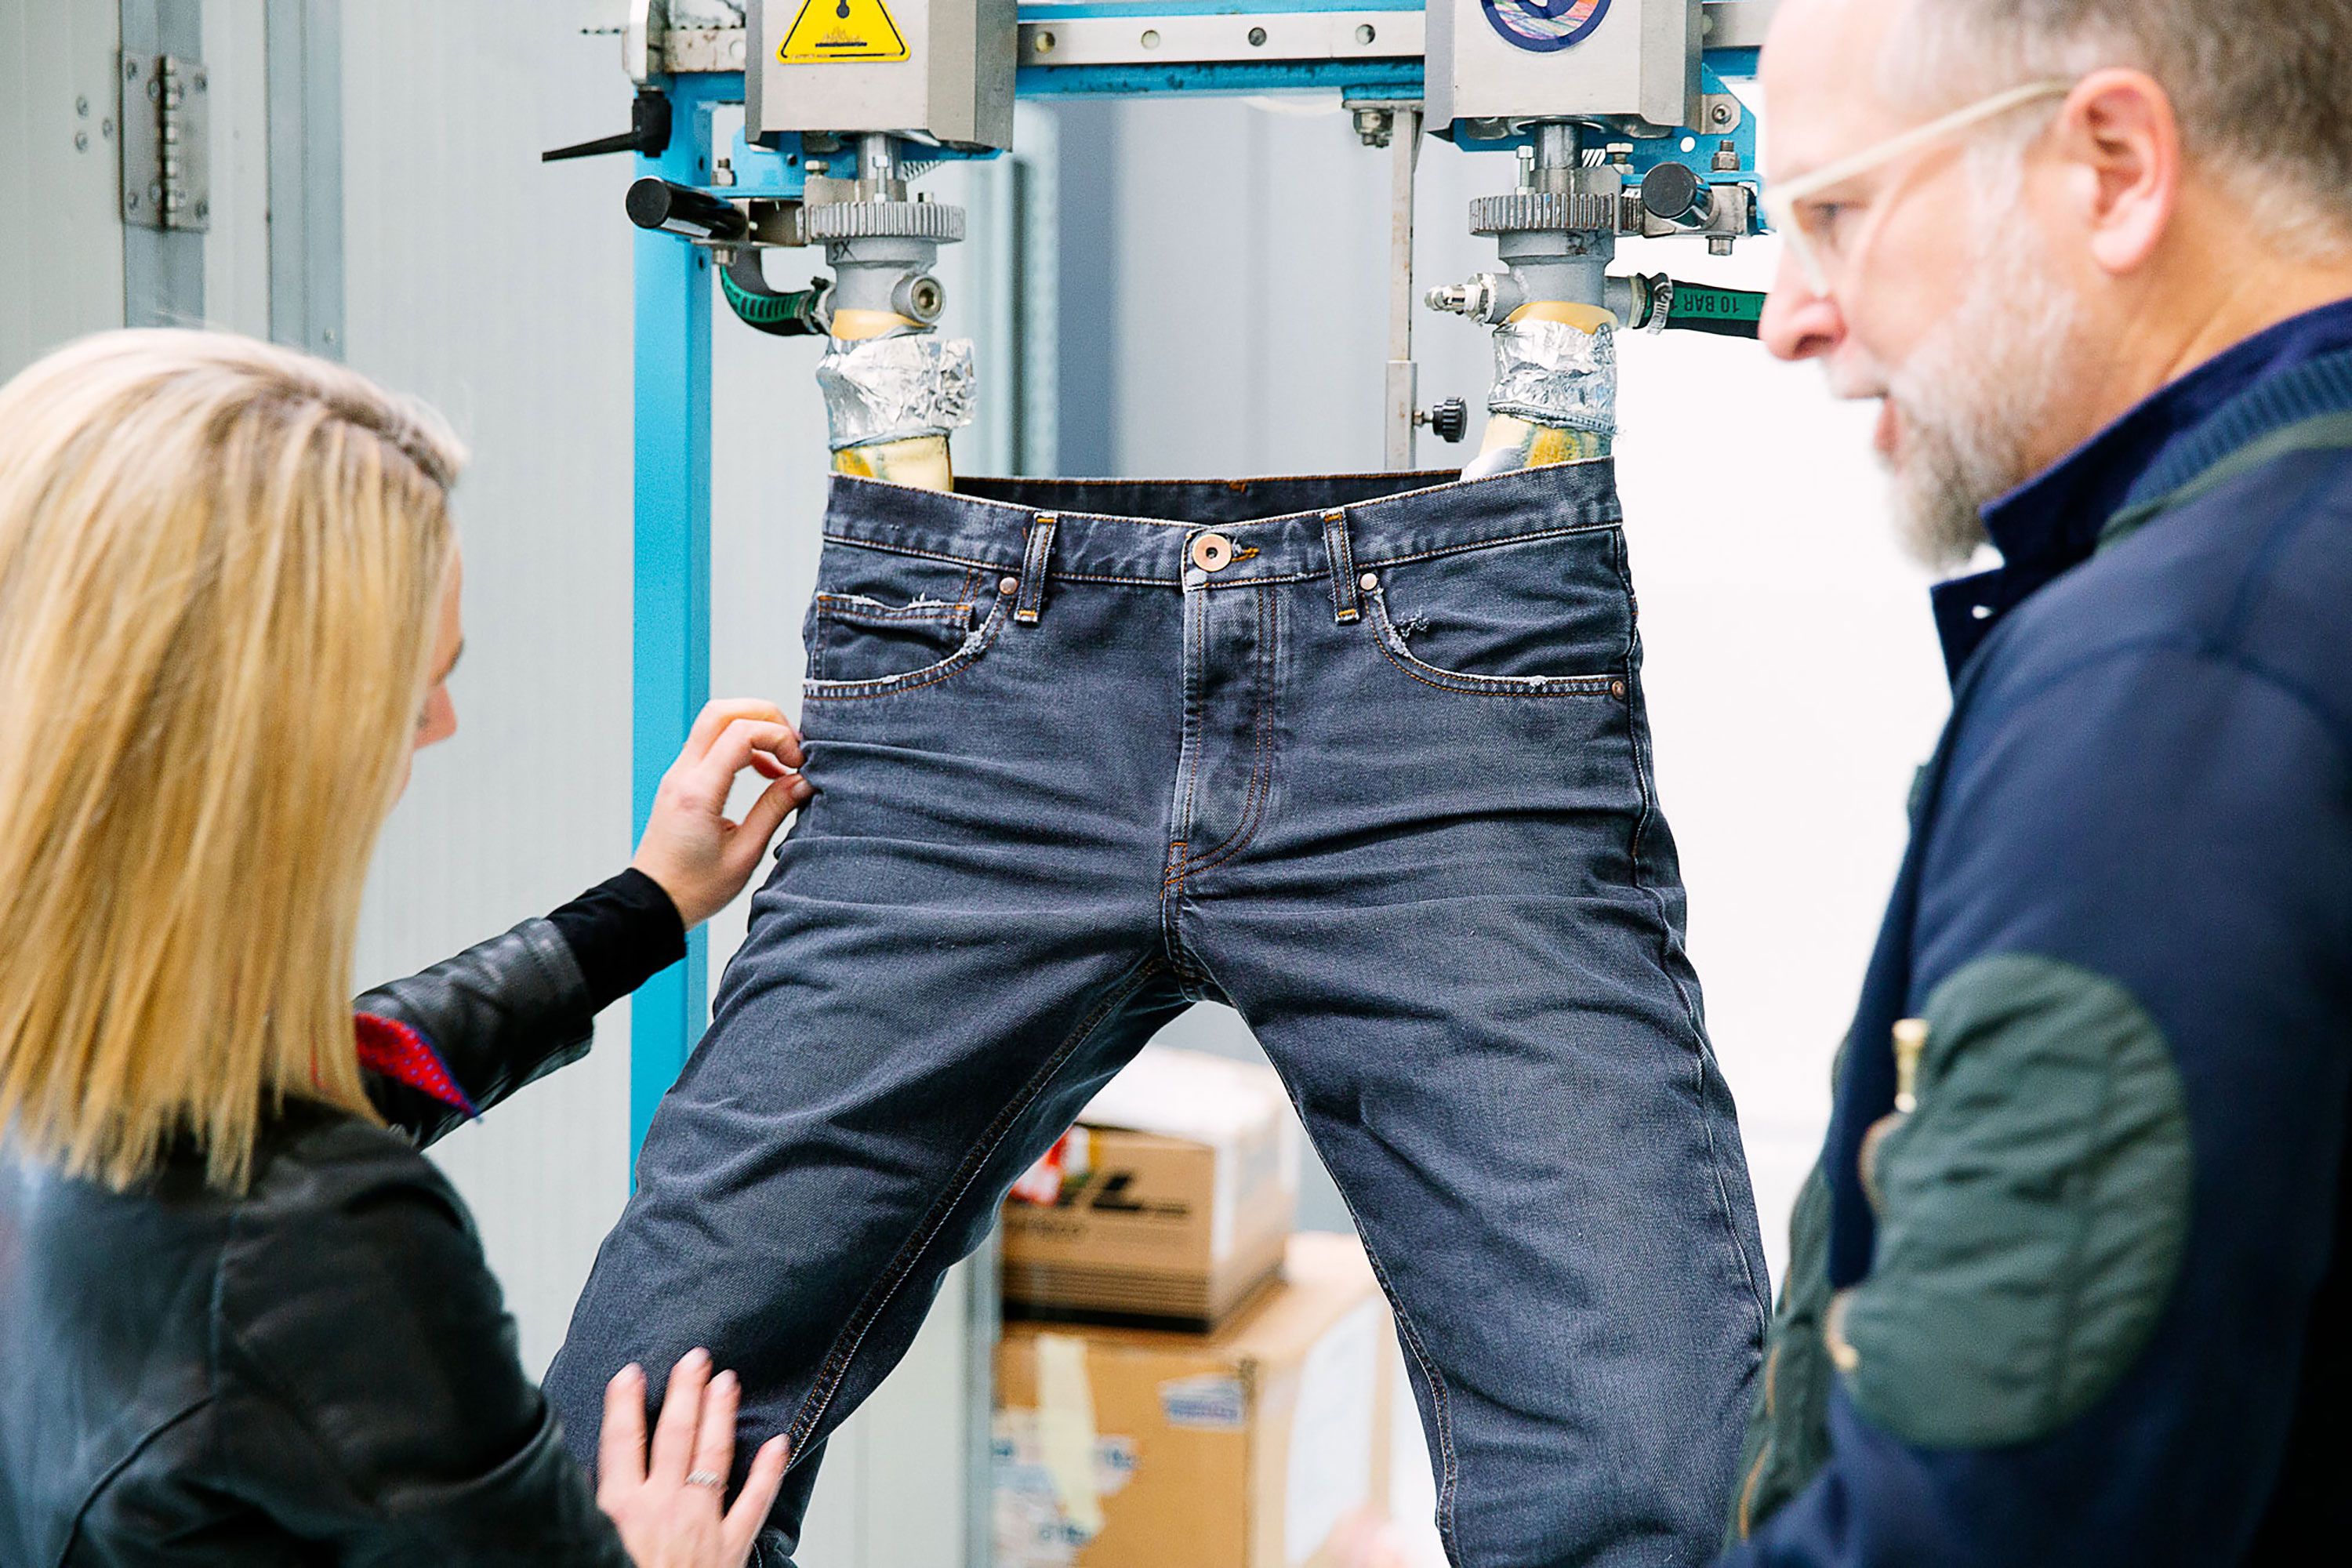 Ethical Clothing - Jeans Manufacturing Costs